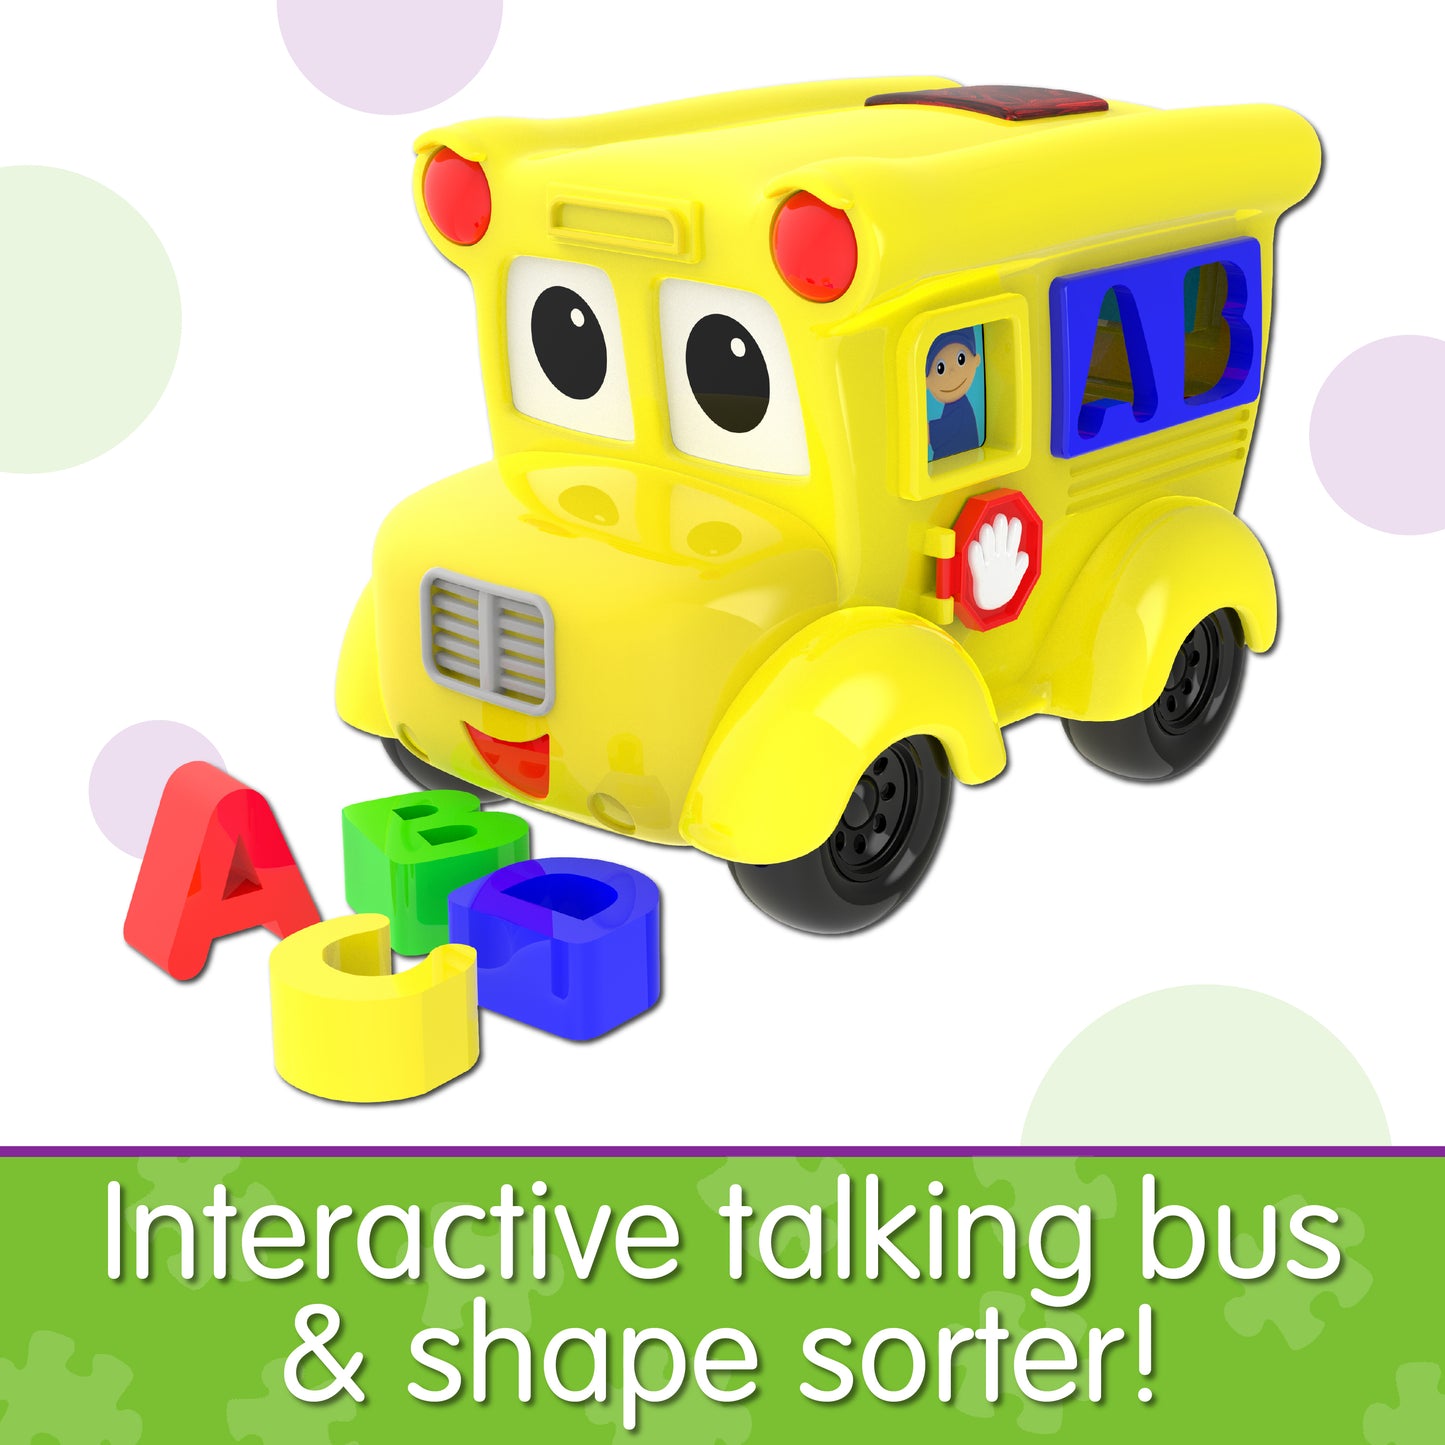 Infographic about Letterland School Bus that says, "Interactive talking bus and shape sorter!"